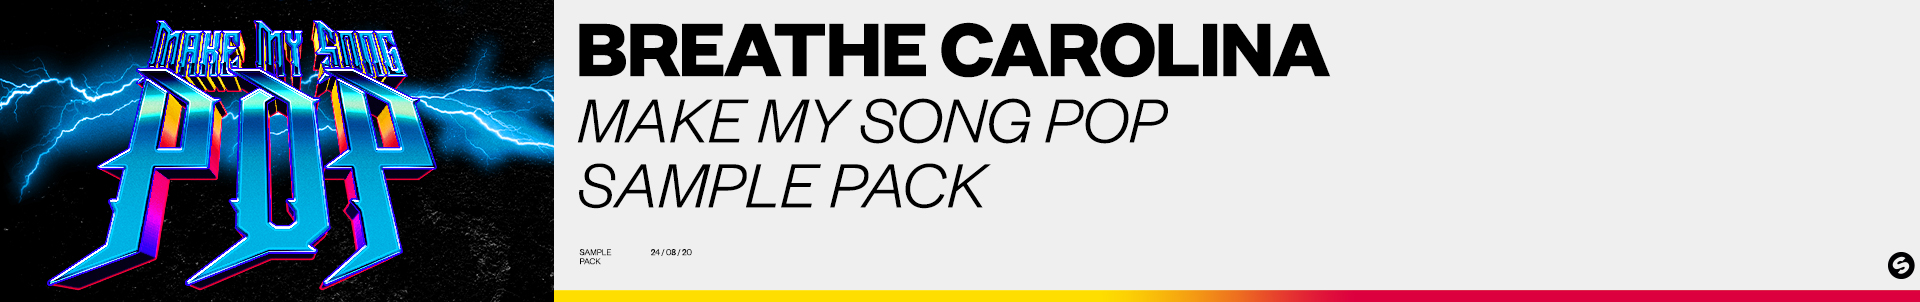 Splice and Spinnin' Records present new artist featured sample pack: Breathe Carolina's ‘Make My Song Pop’ sample pack!